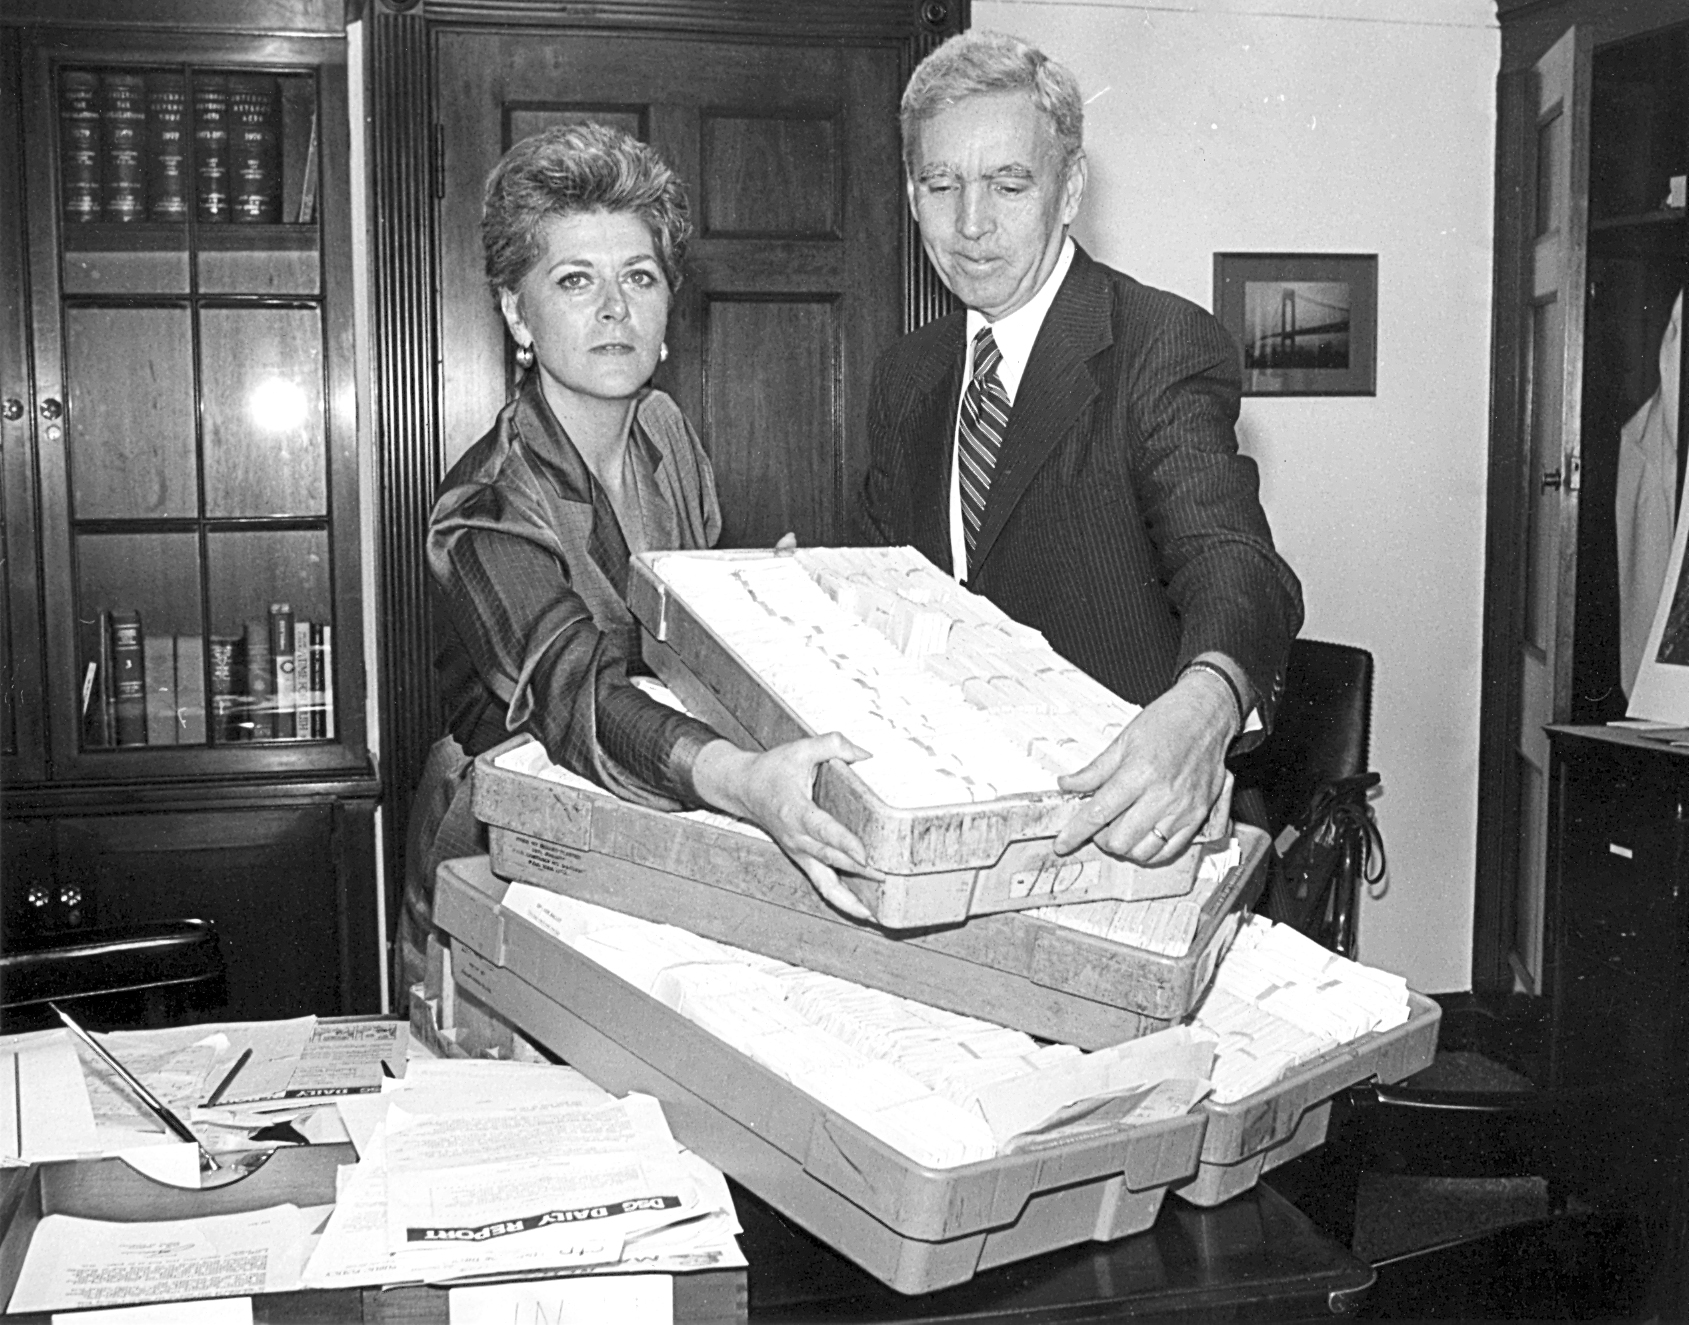 In June 1979, Congresswoman Geraldine Ferraro delivered to Postmaster General William Bolger thousands of post cards from Ridgewood and Glendale residents who desired a new Queens-based ZIP code to replace the one they shared in Brooklyn.